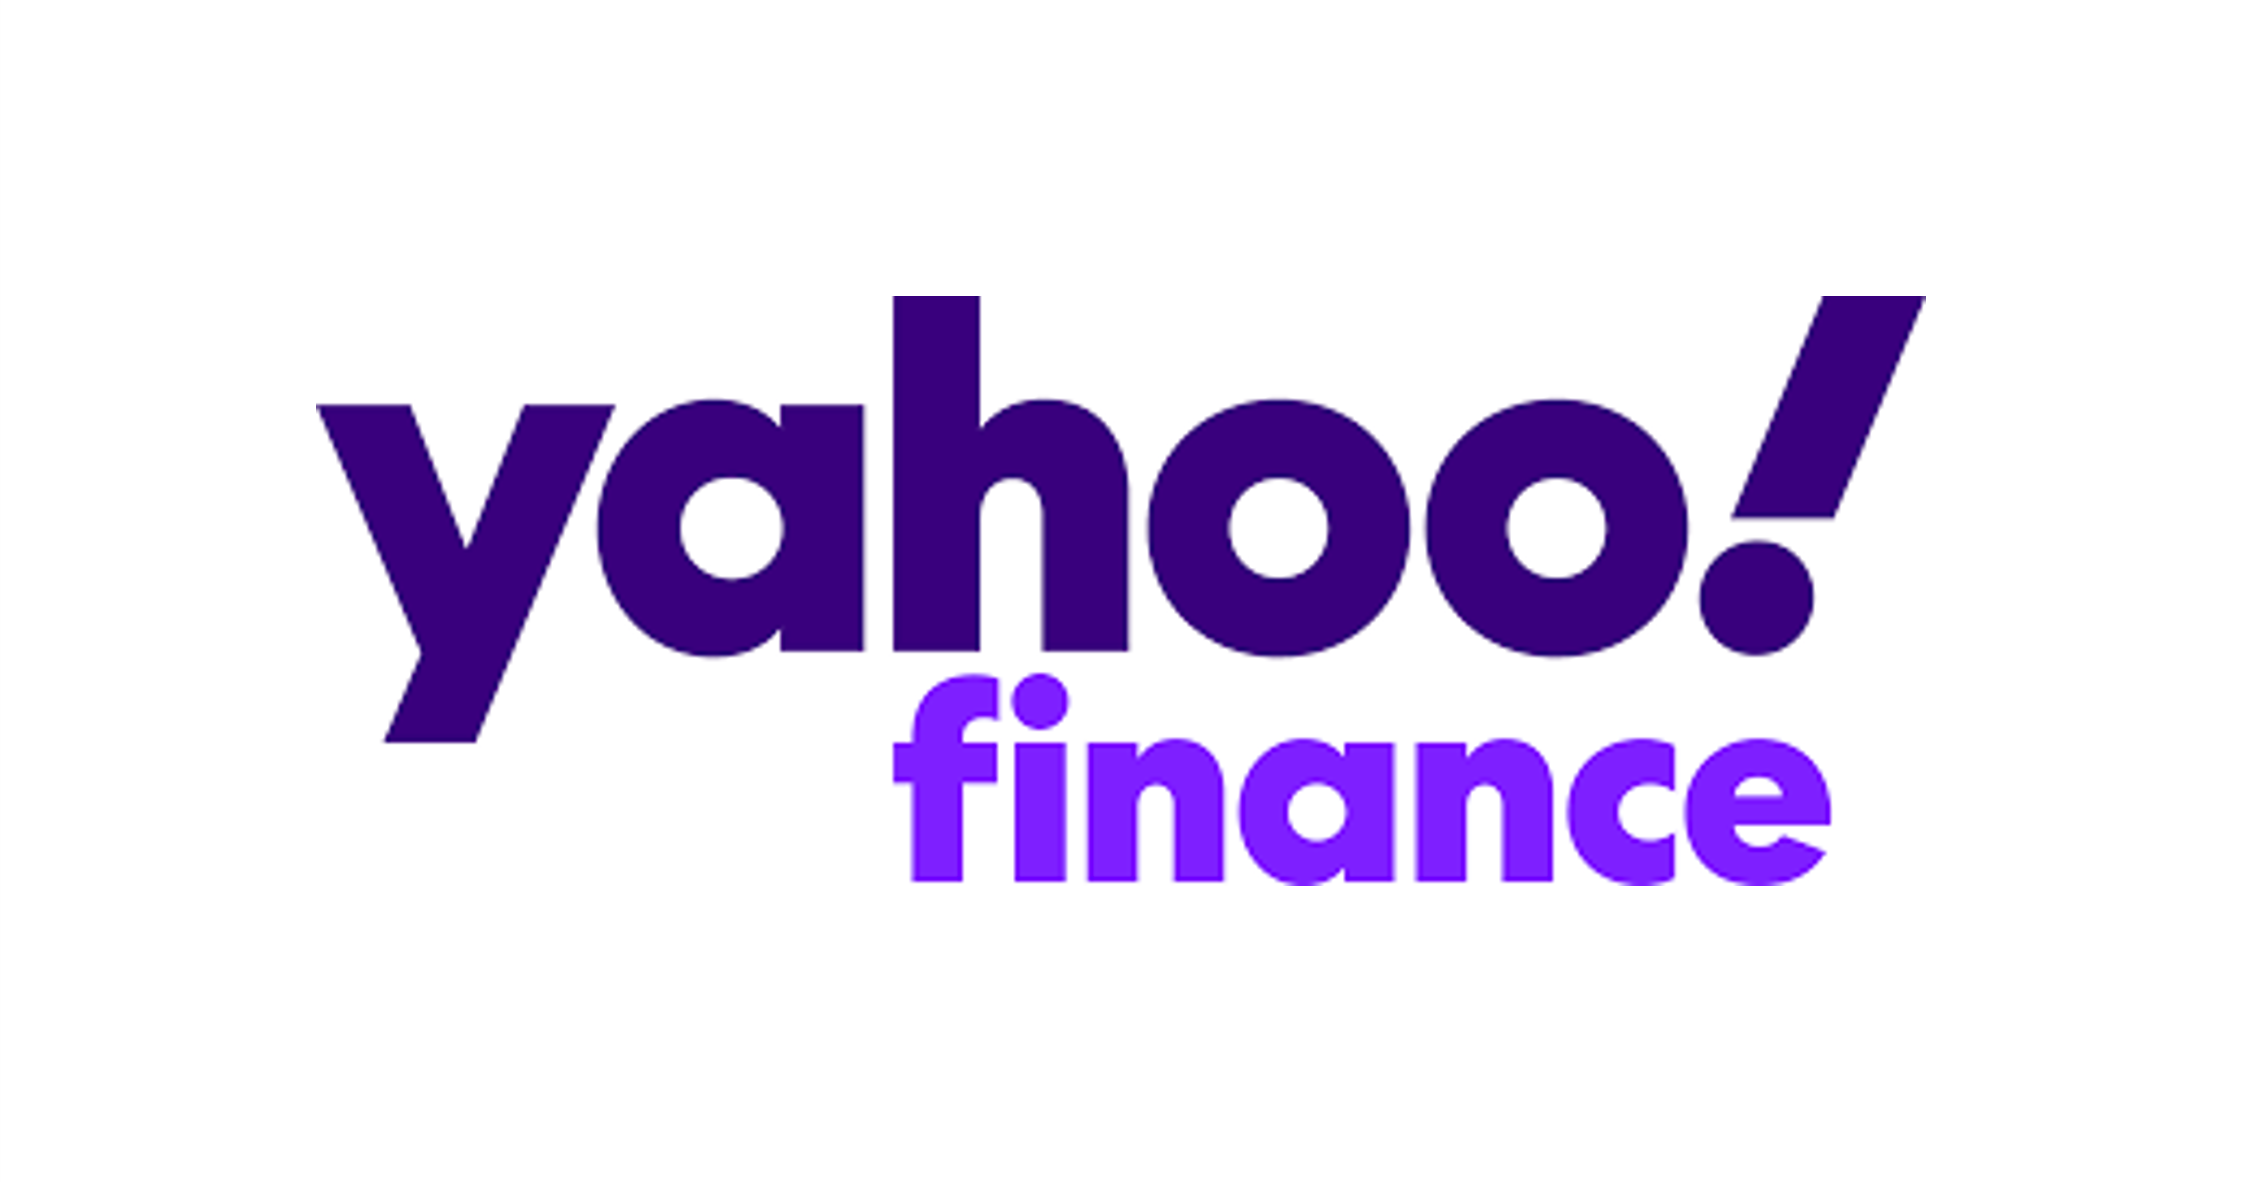 Stops was featured in Yahoo Finance